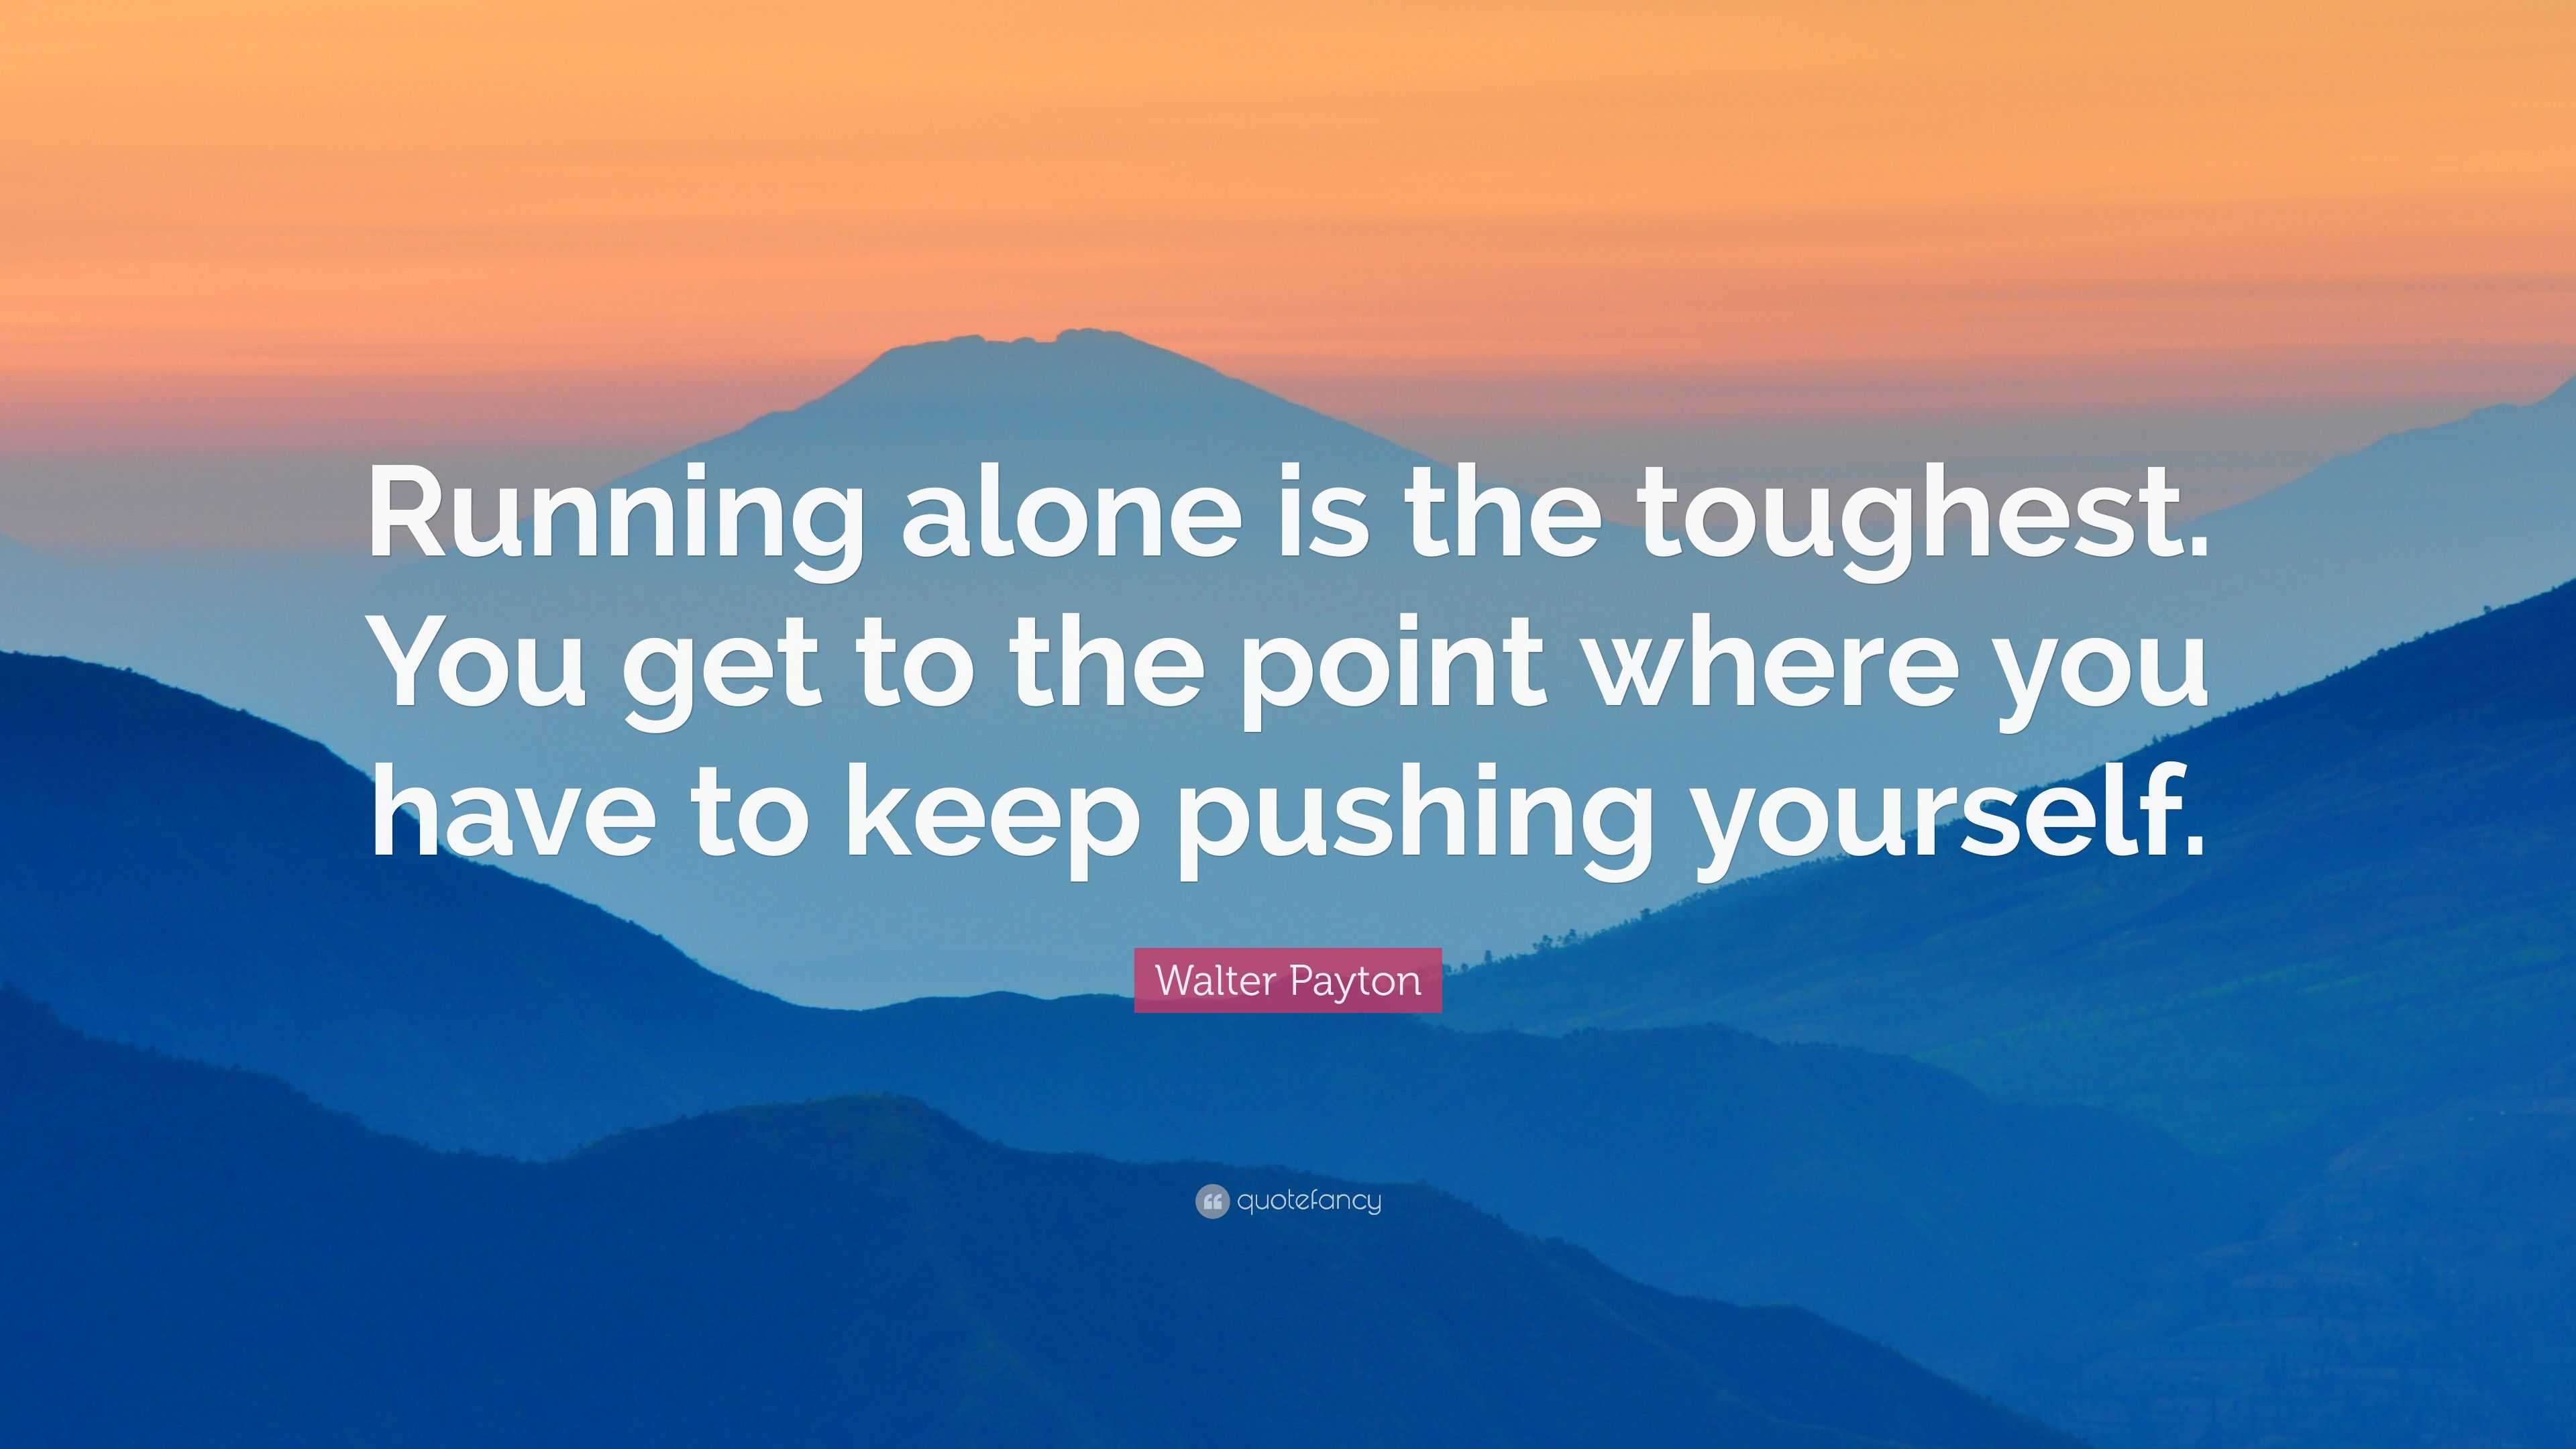 Walter Payton Quote: “Running alone is the toughest. You get to the ...